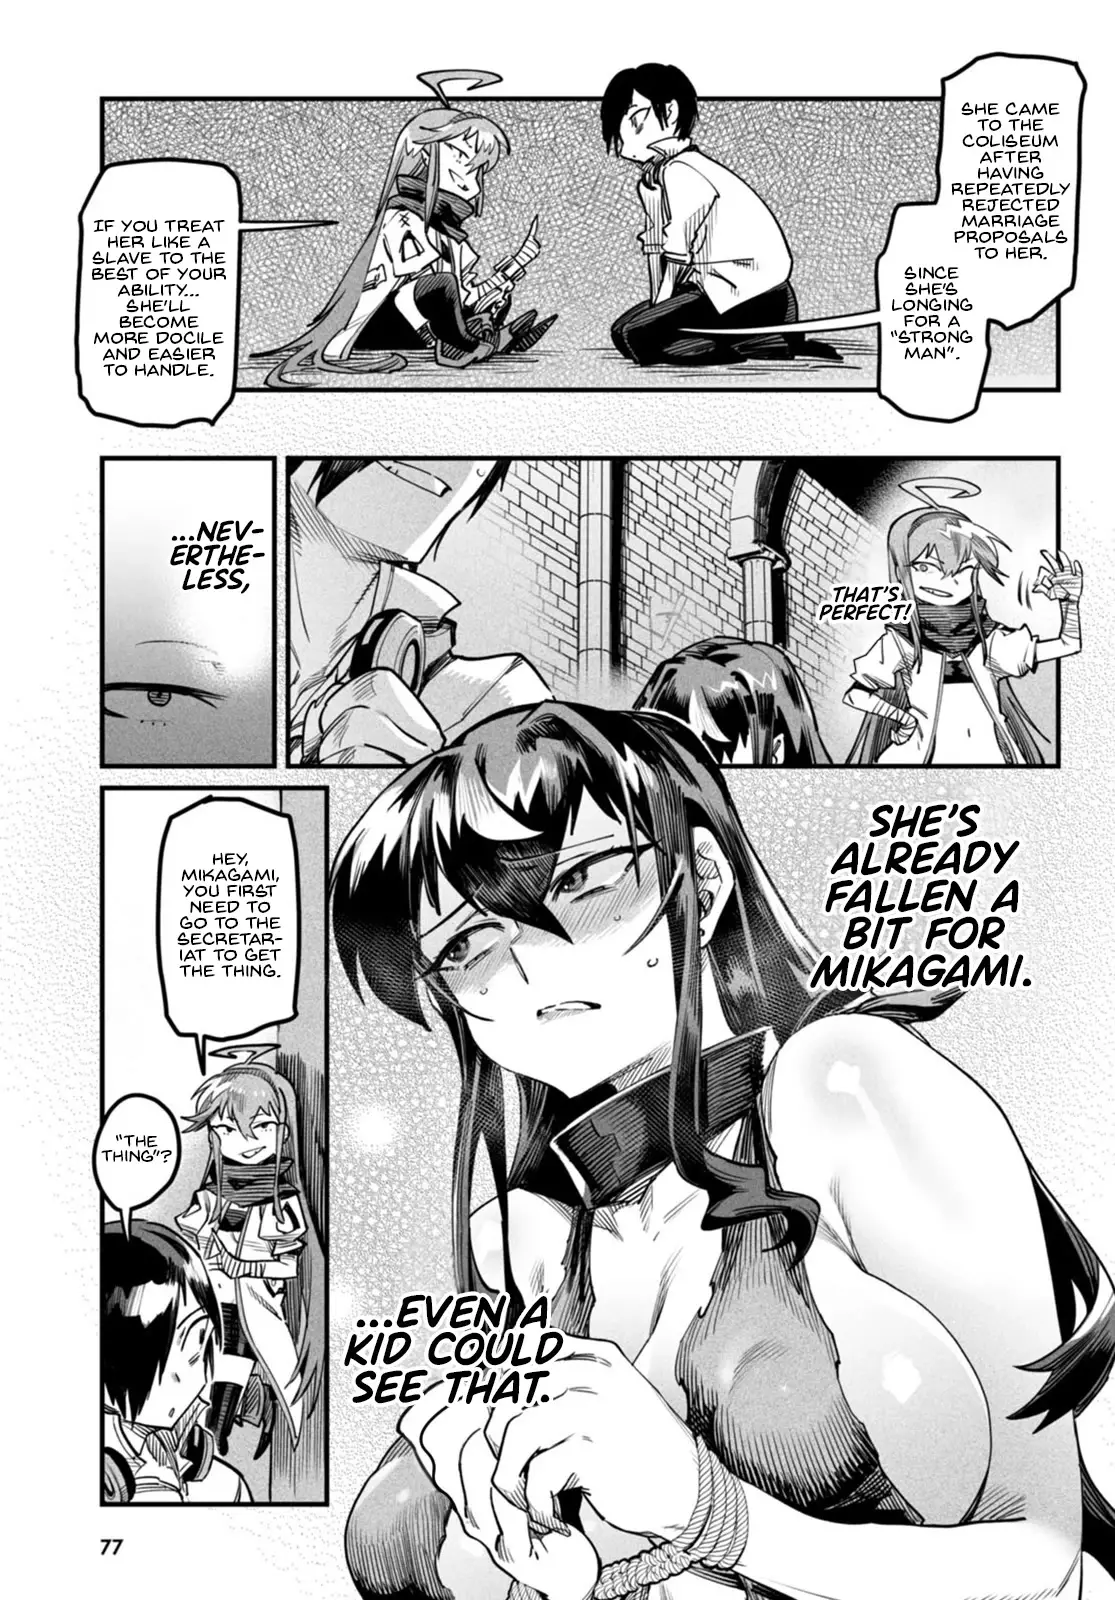 Reincarnation Colosseum - Using The Weakest Skills In Order To Defeat The Strongest Women And Create A Slave Harem - 3 page 6-4b49d277